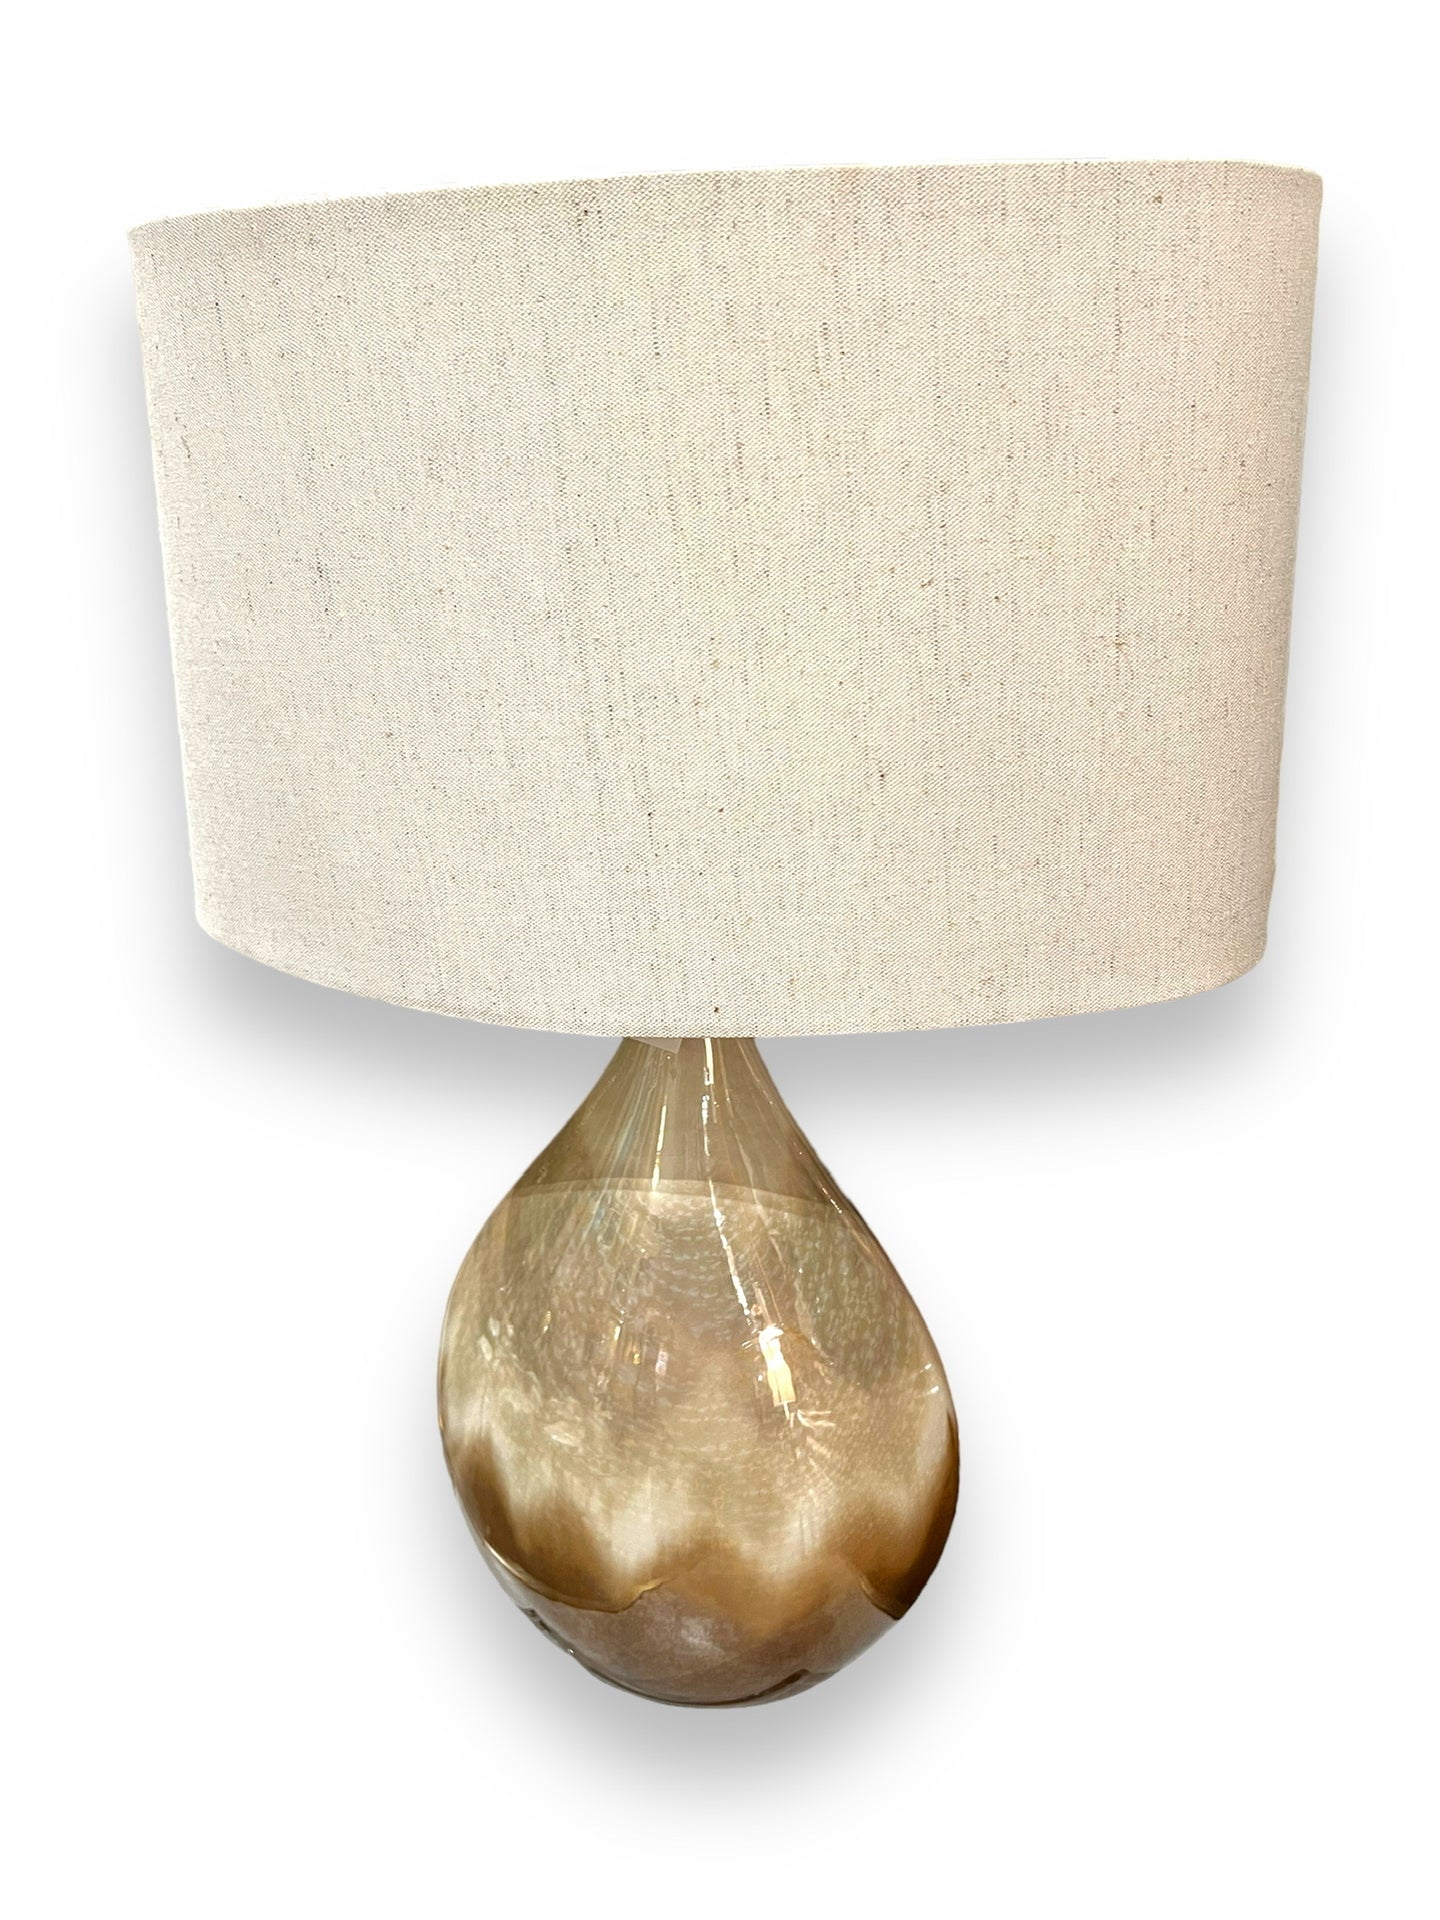 Neiman Marcus Glass Lamp with Linen Shade - DeFrenS